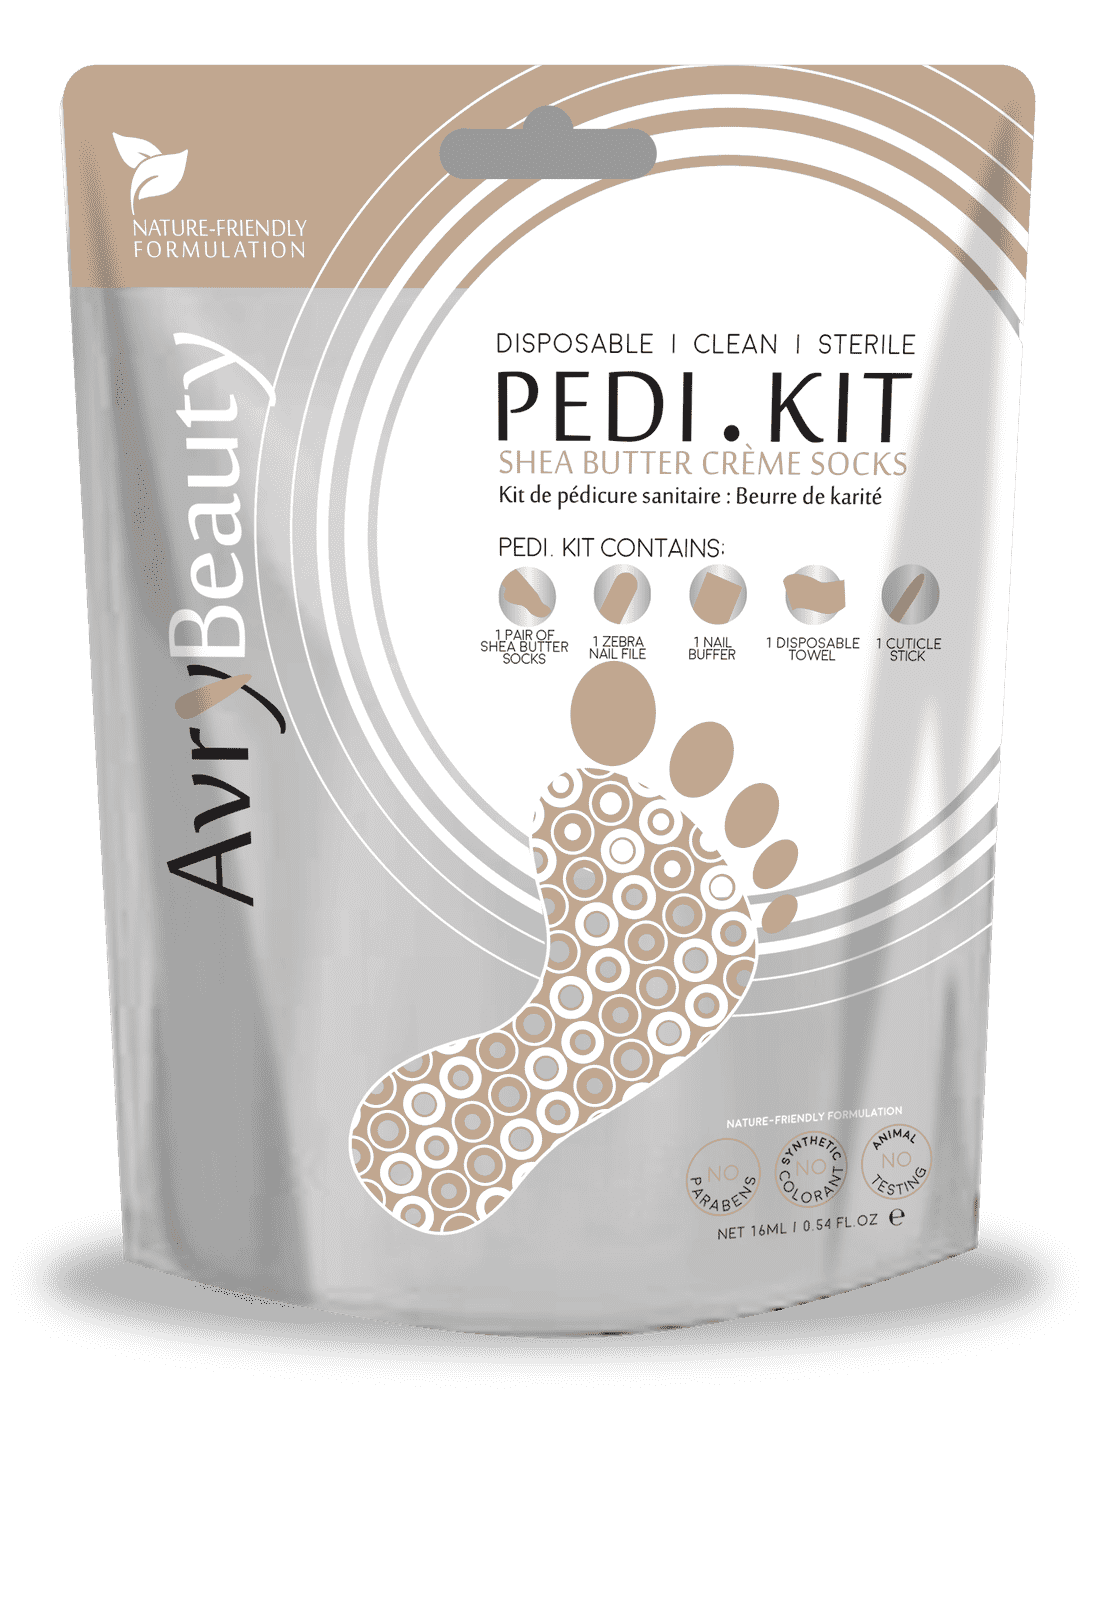 All-In-One Disposable PEDI Kit with Shea Butter Socks - Maskscara